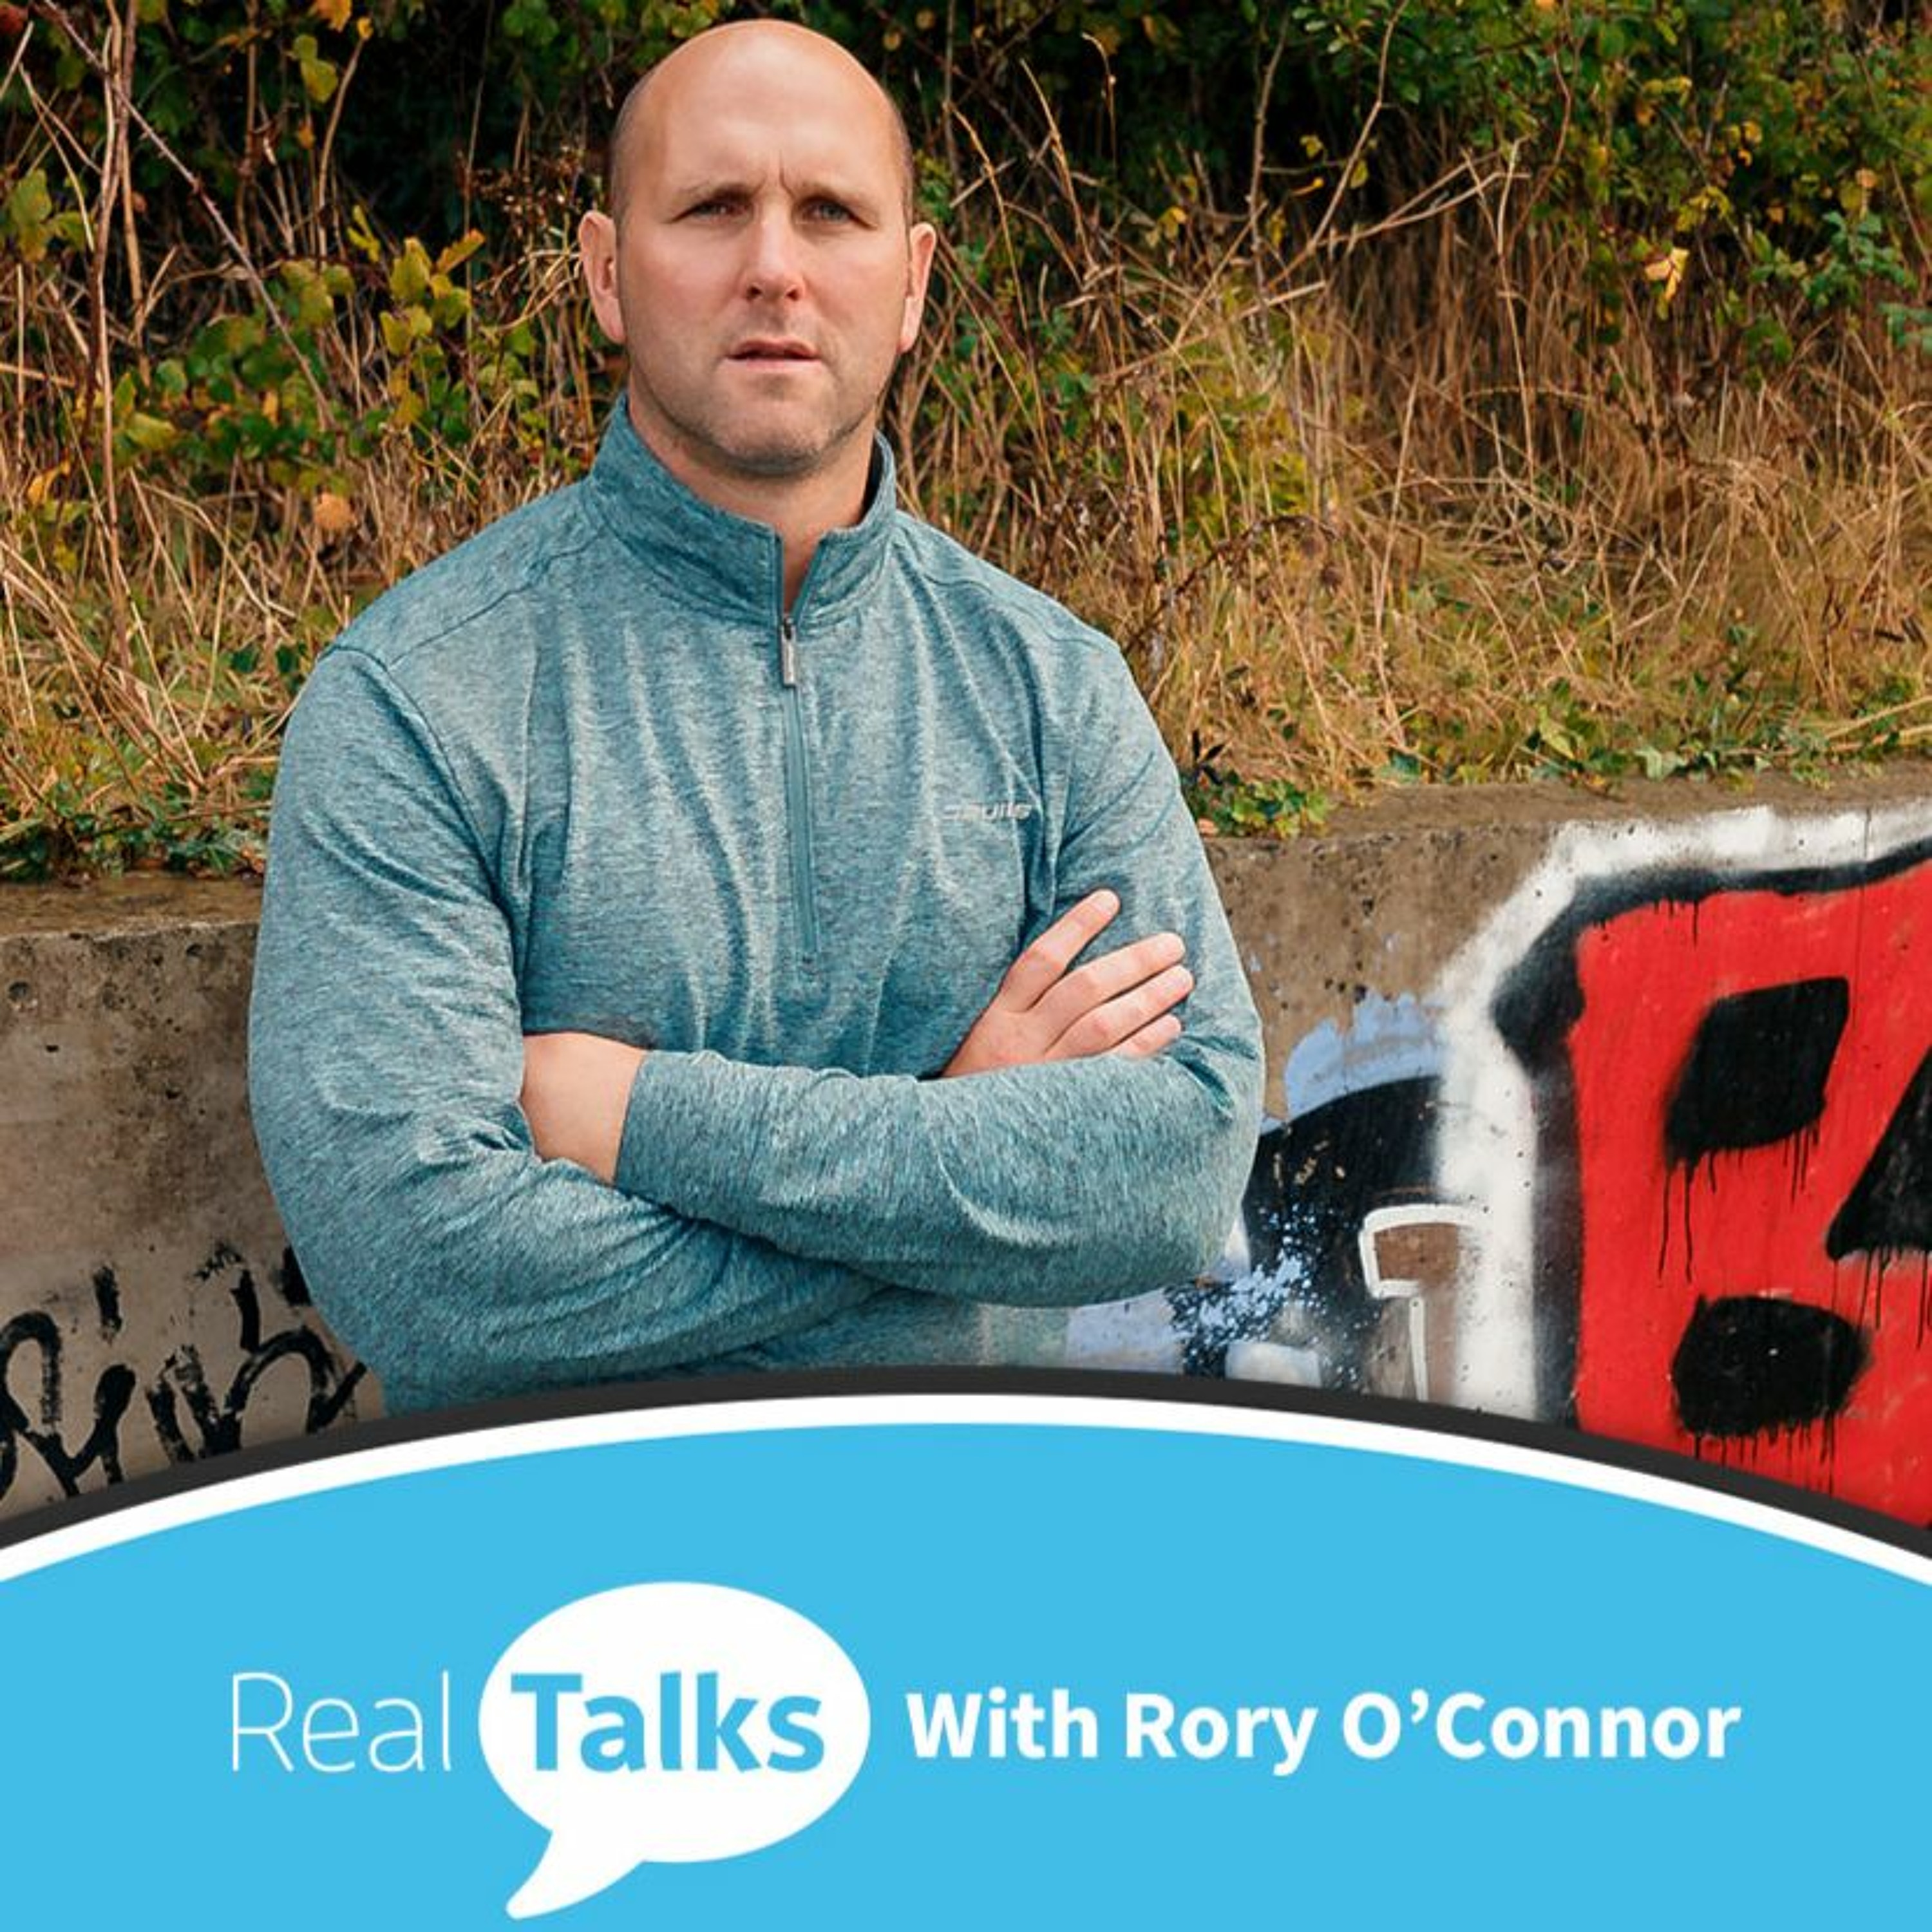 Rory O'Connor (aka Rory's Stories)